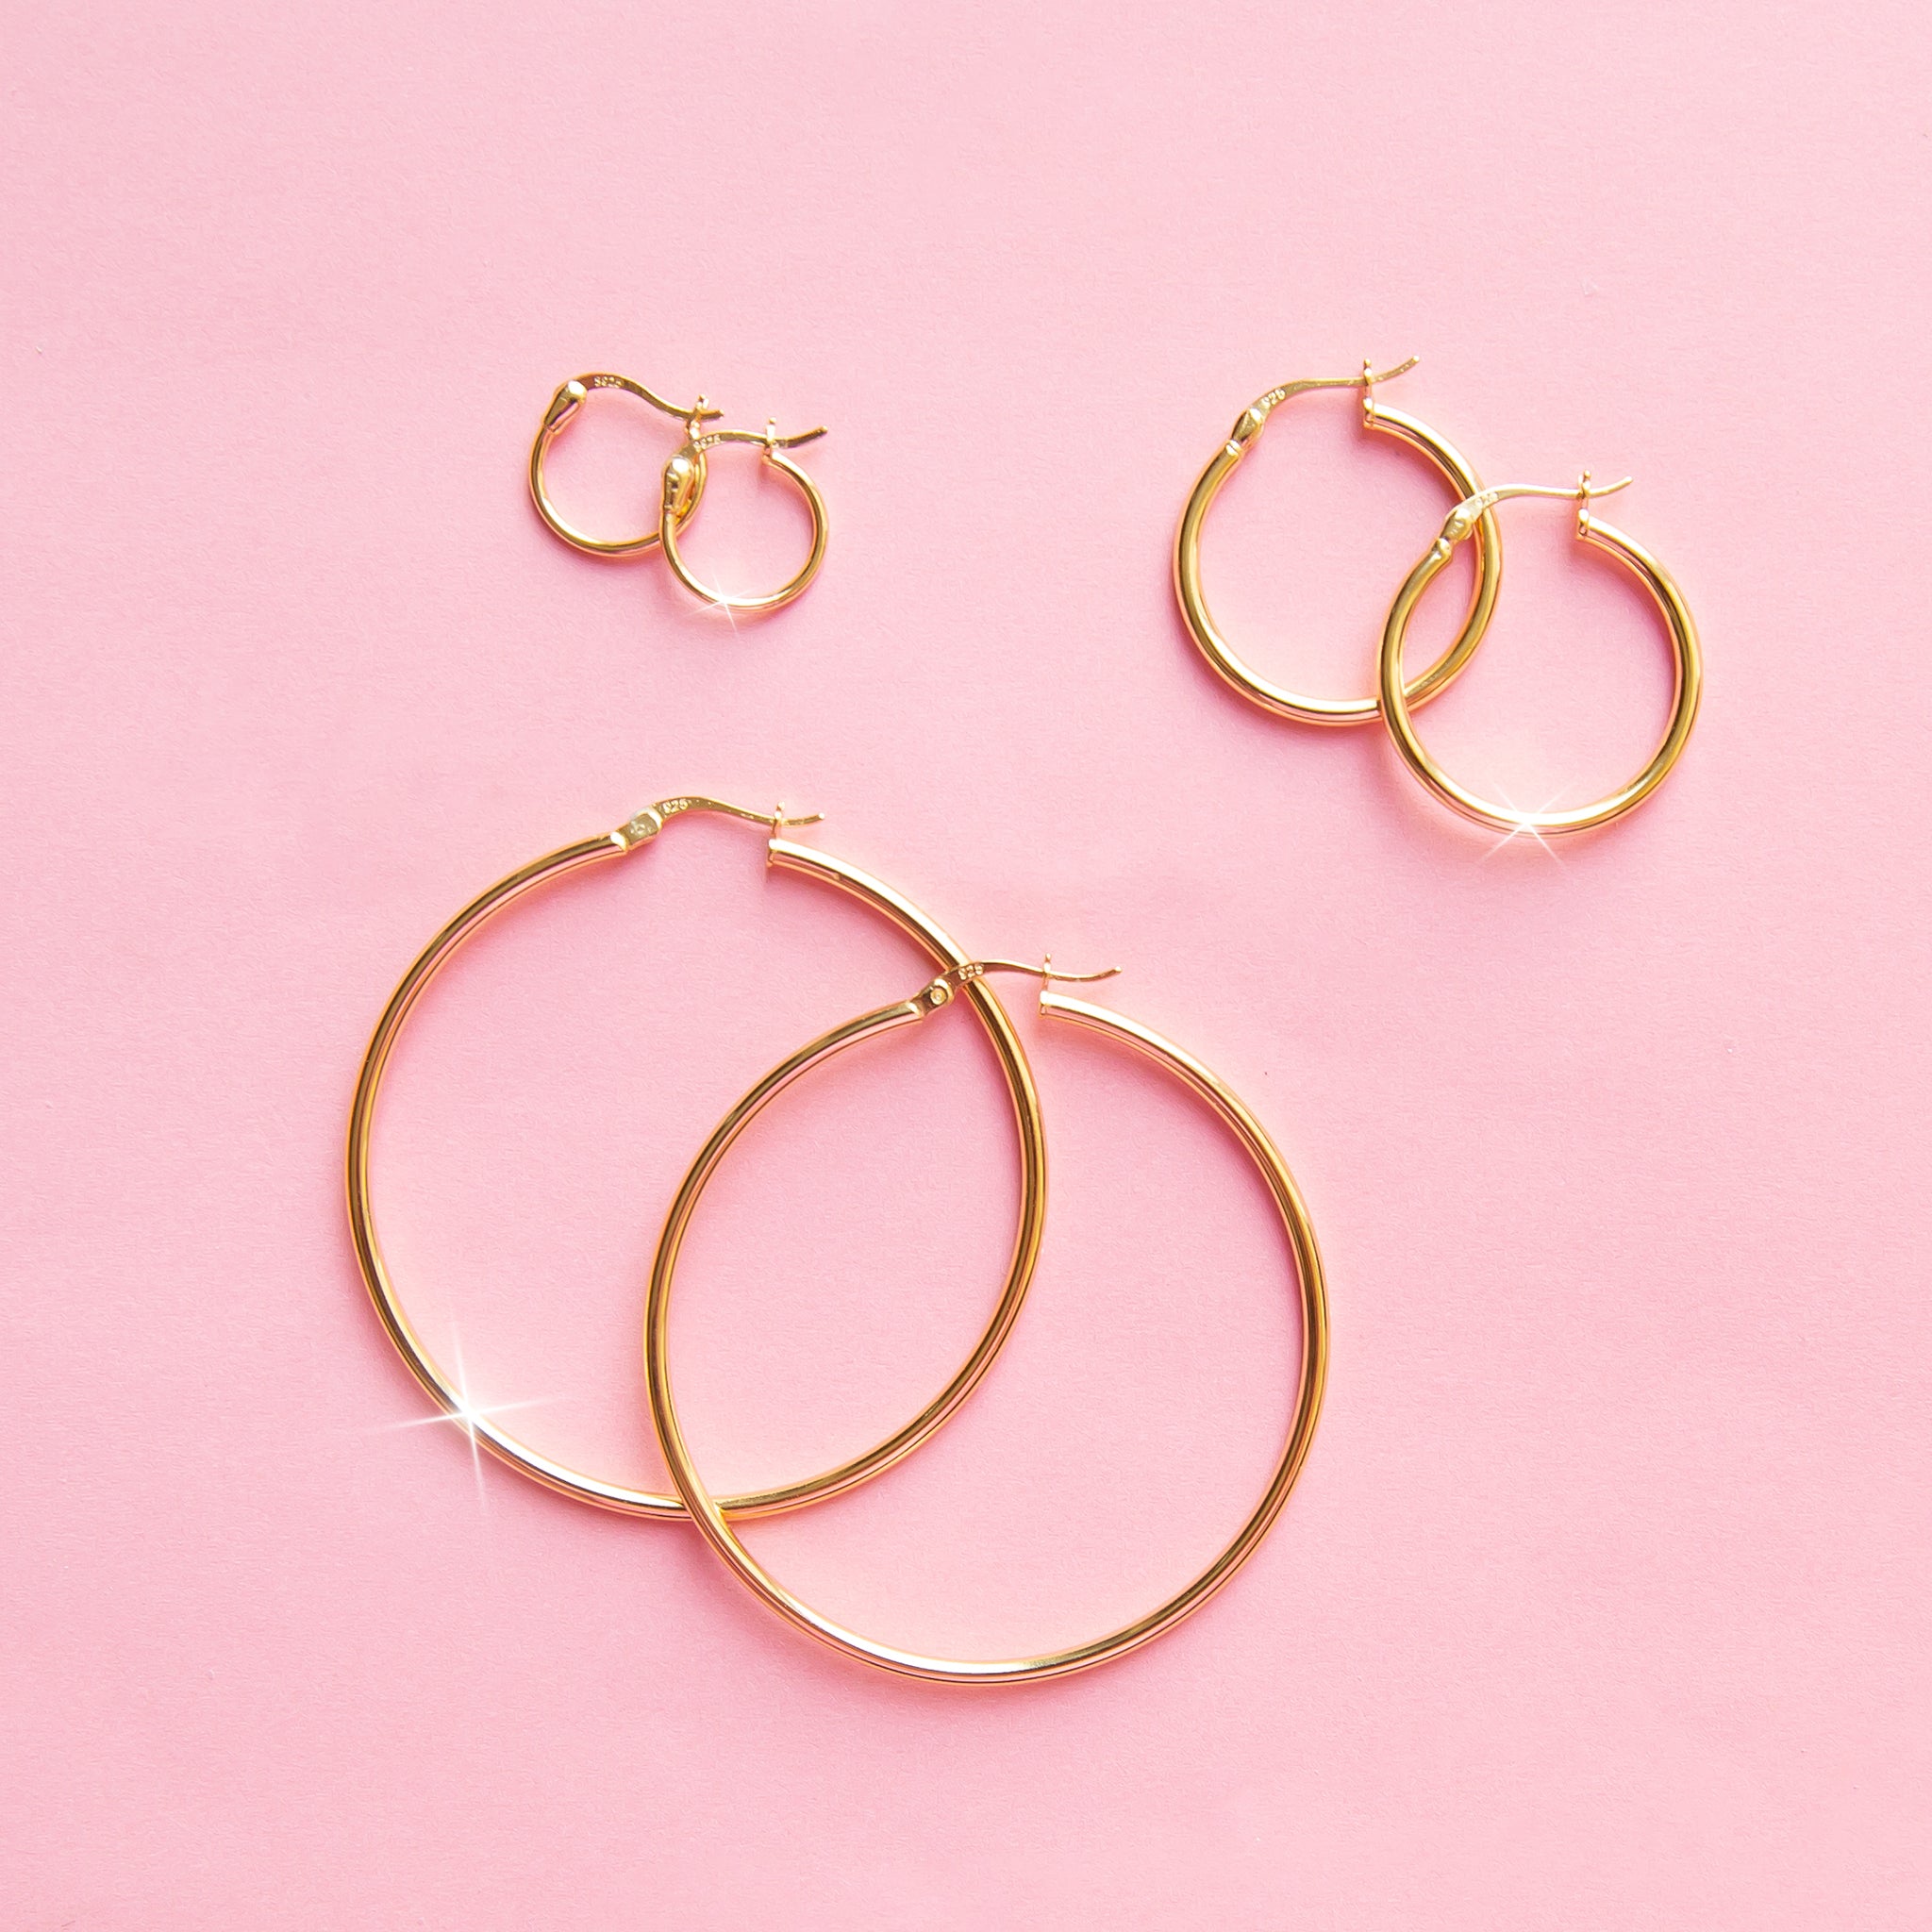 On a pink background is three different sized pairs of thin hoop earrings. 